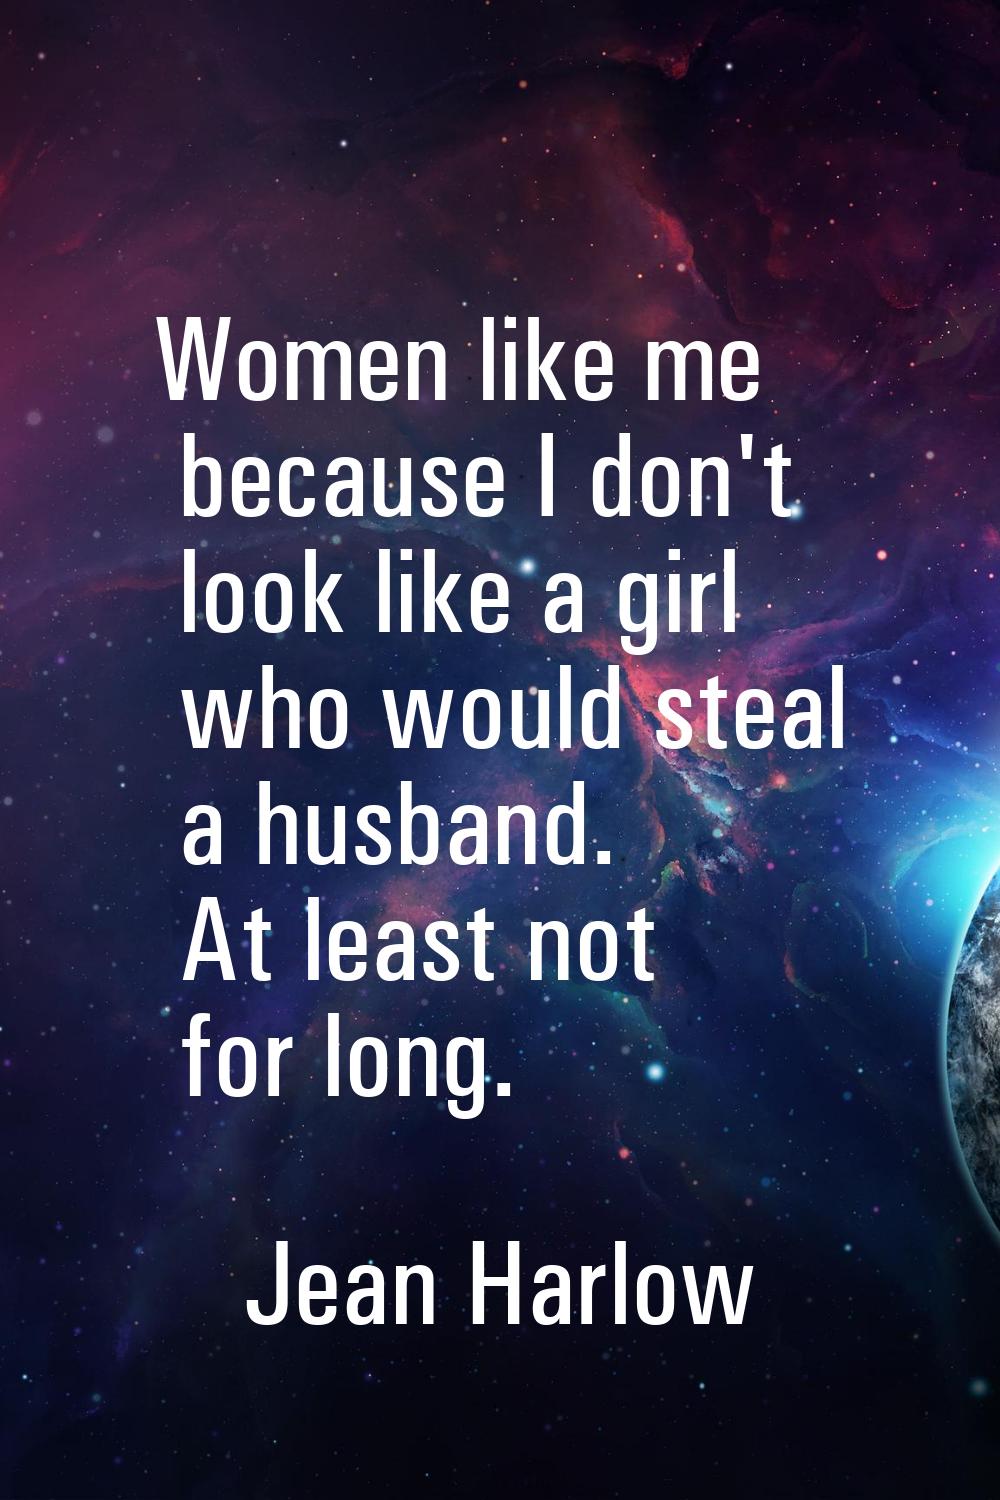 Women like me because I don't look like a girl who would steal a husband. At least not for long.